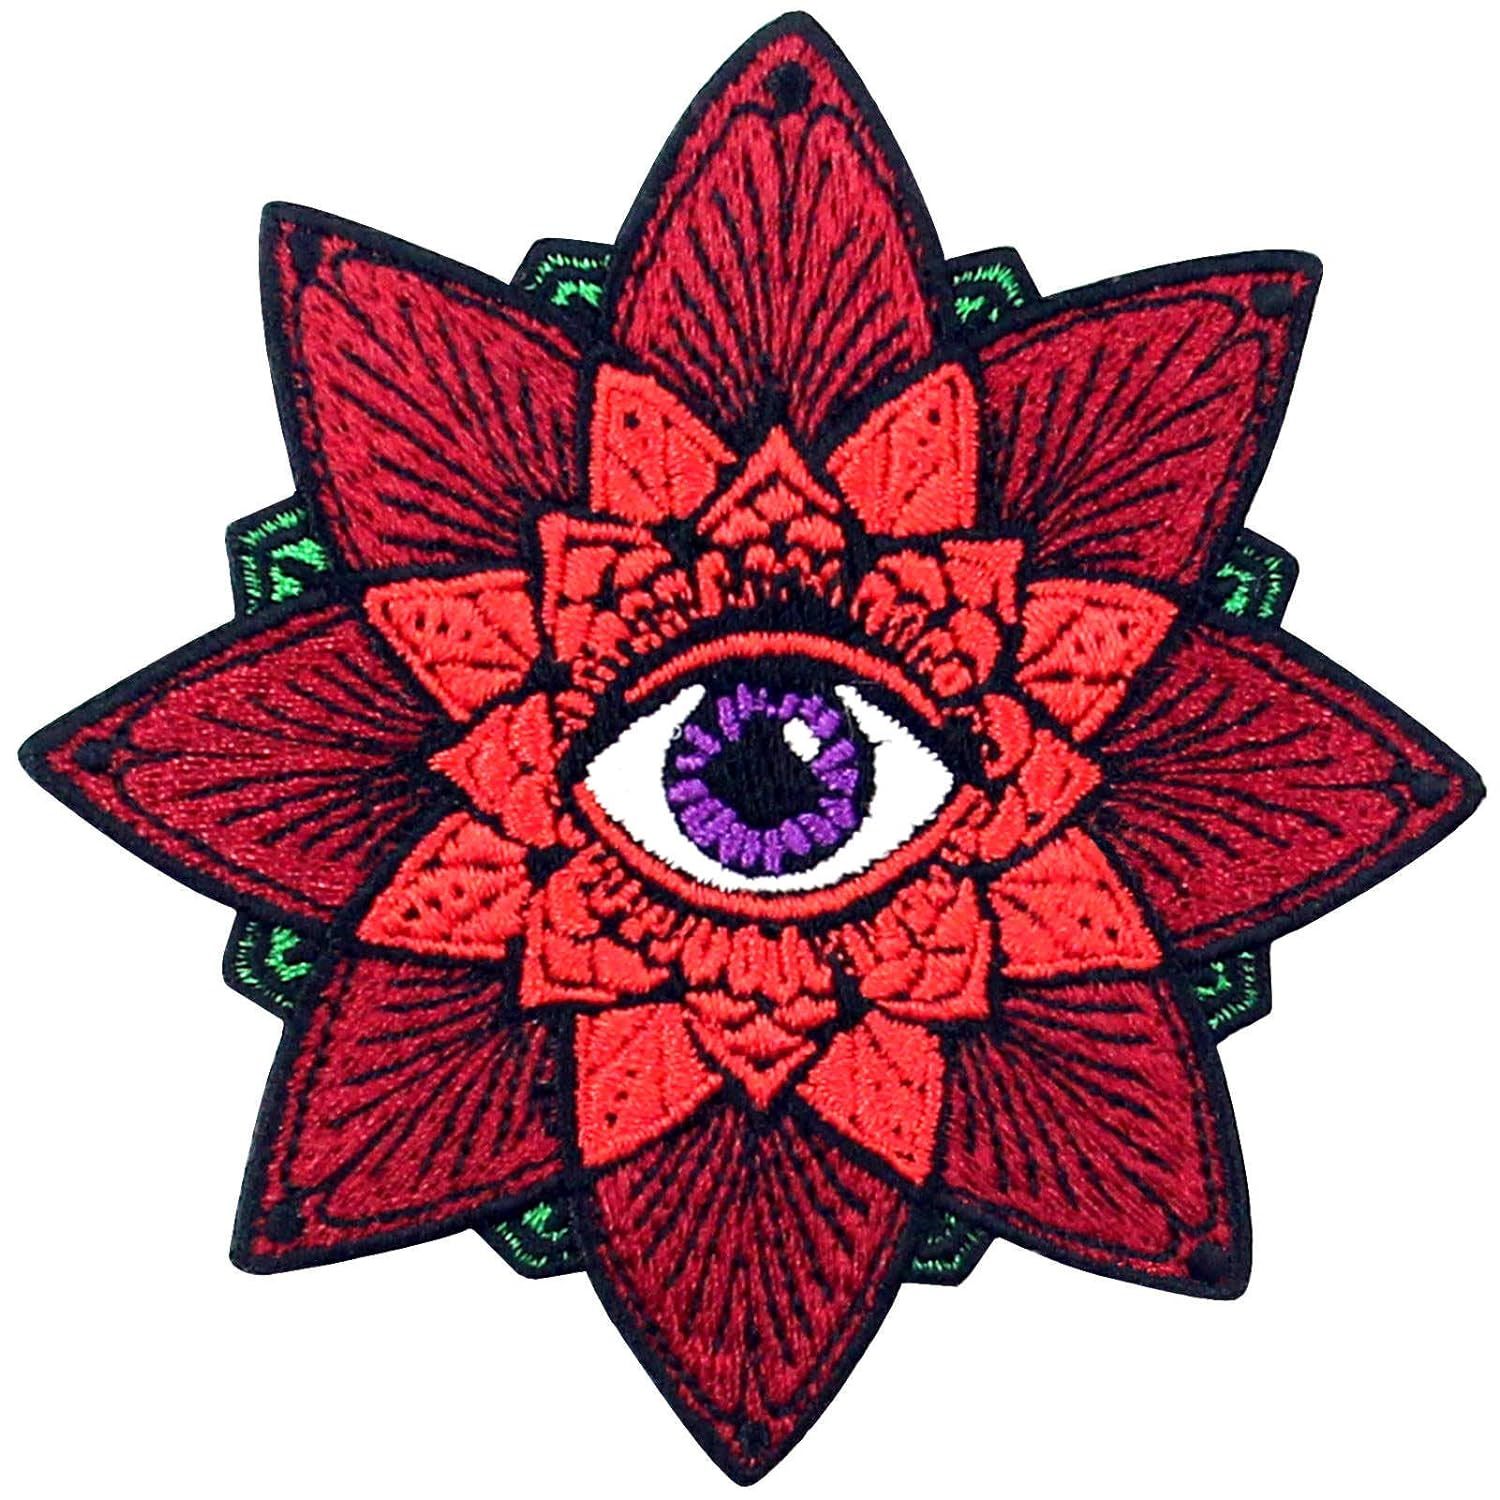 Primary image for The Aztec Eye Patch Embroidered Applique Iron On Sew On Emblem